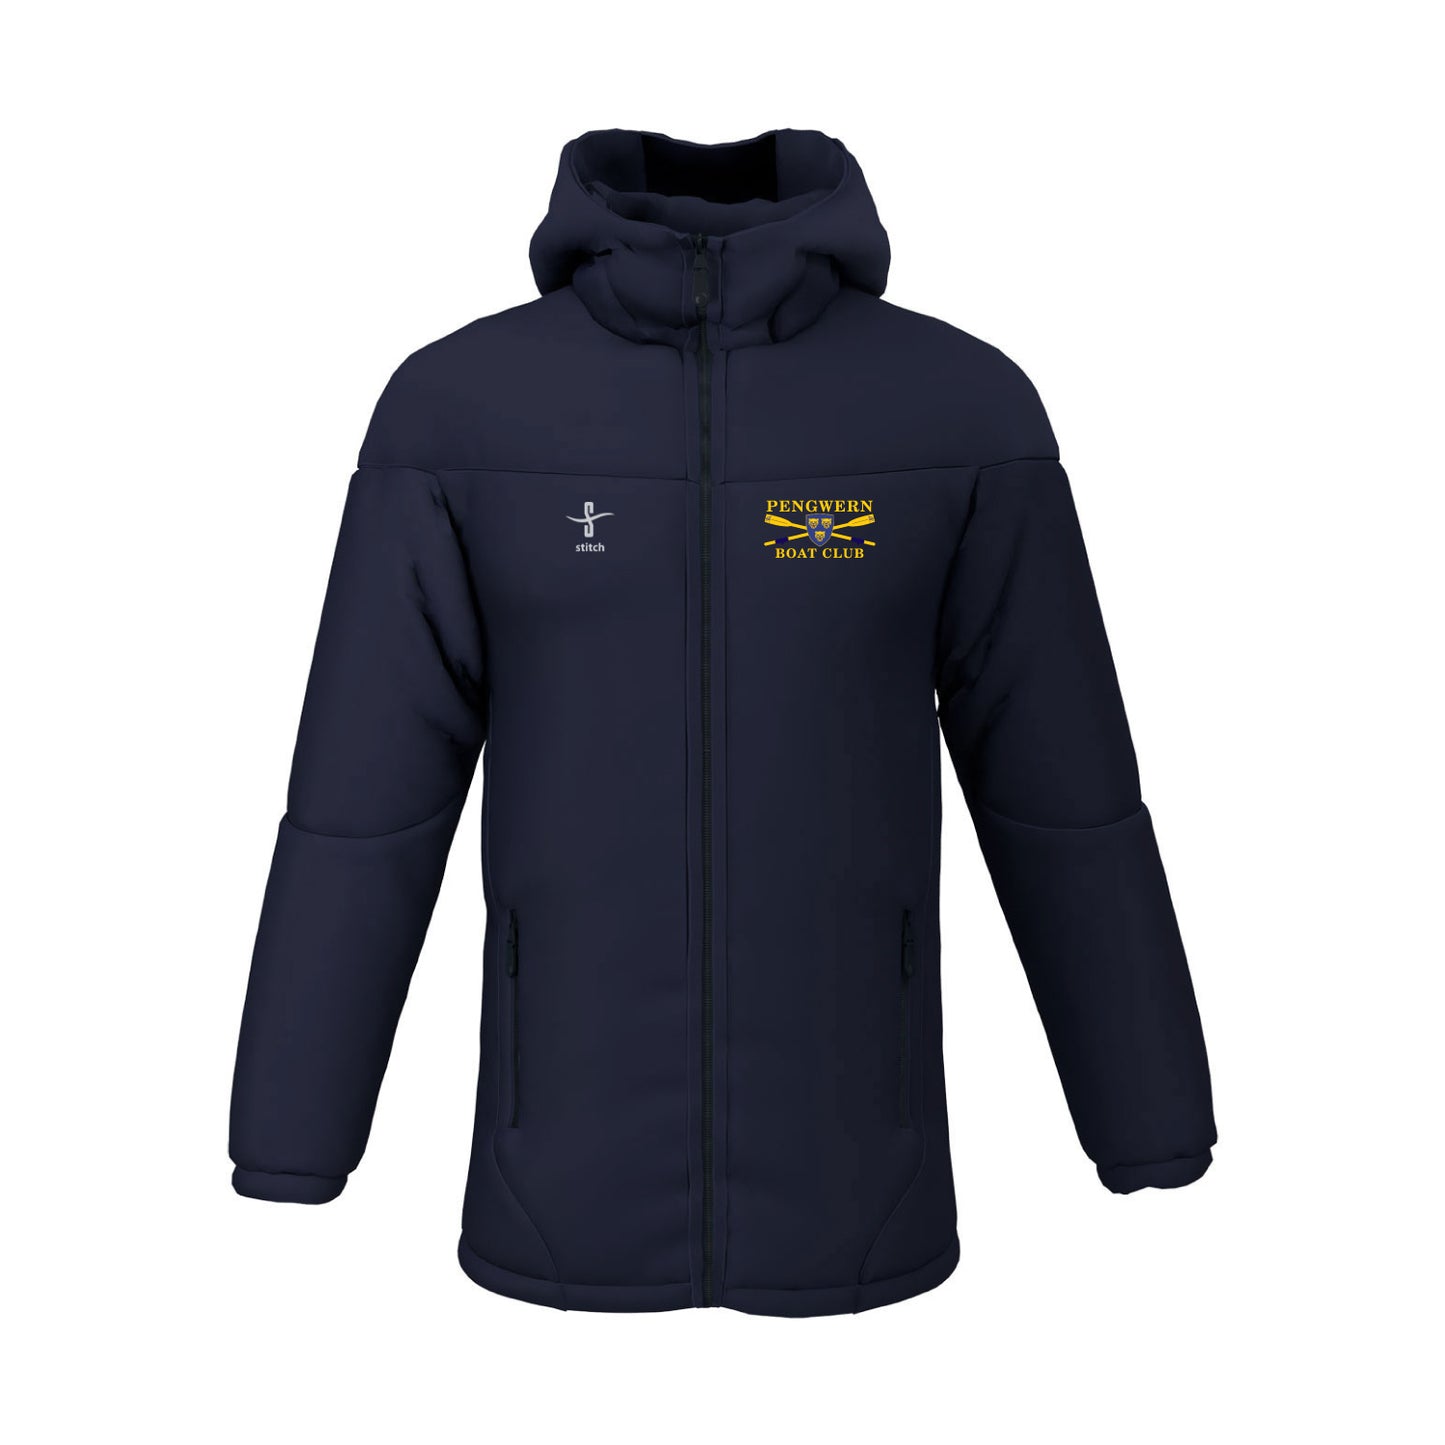 Pengwern Boat Club Contoured Thermal Jacket